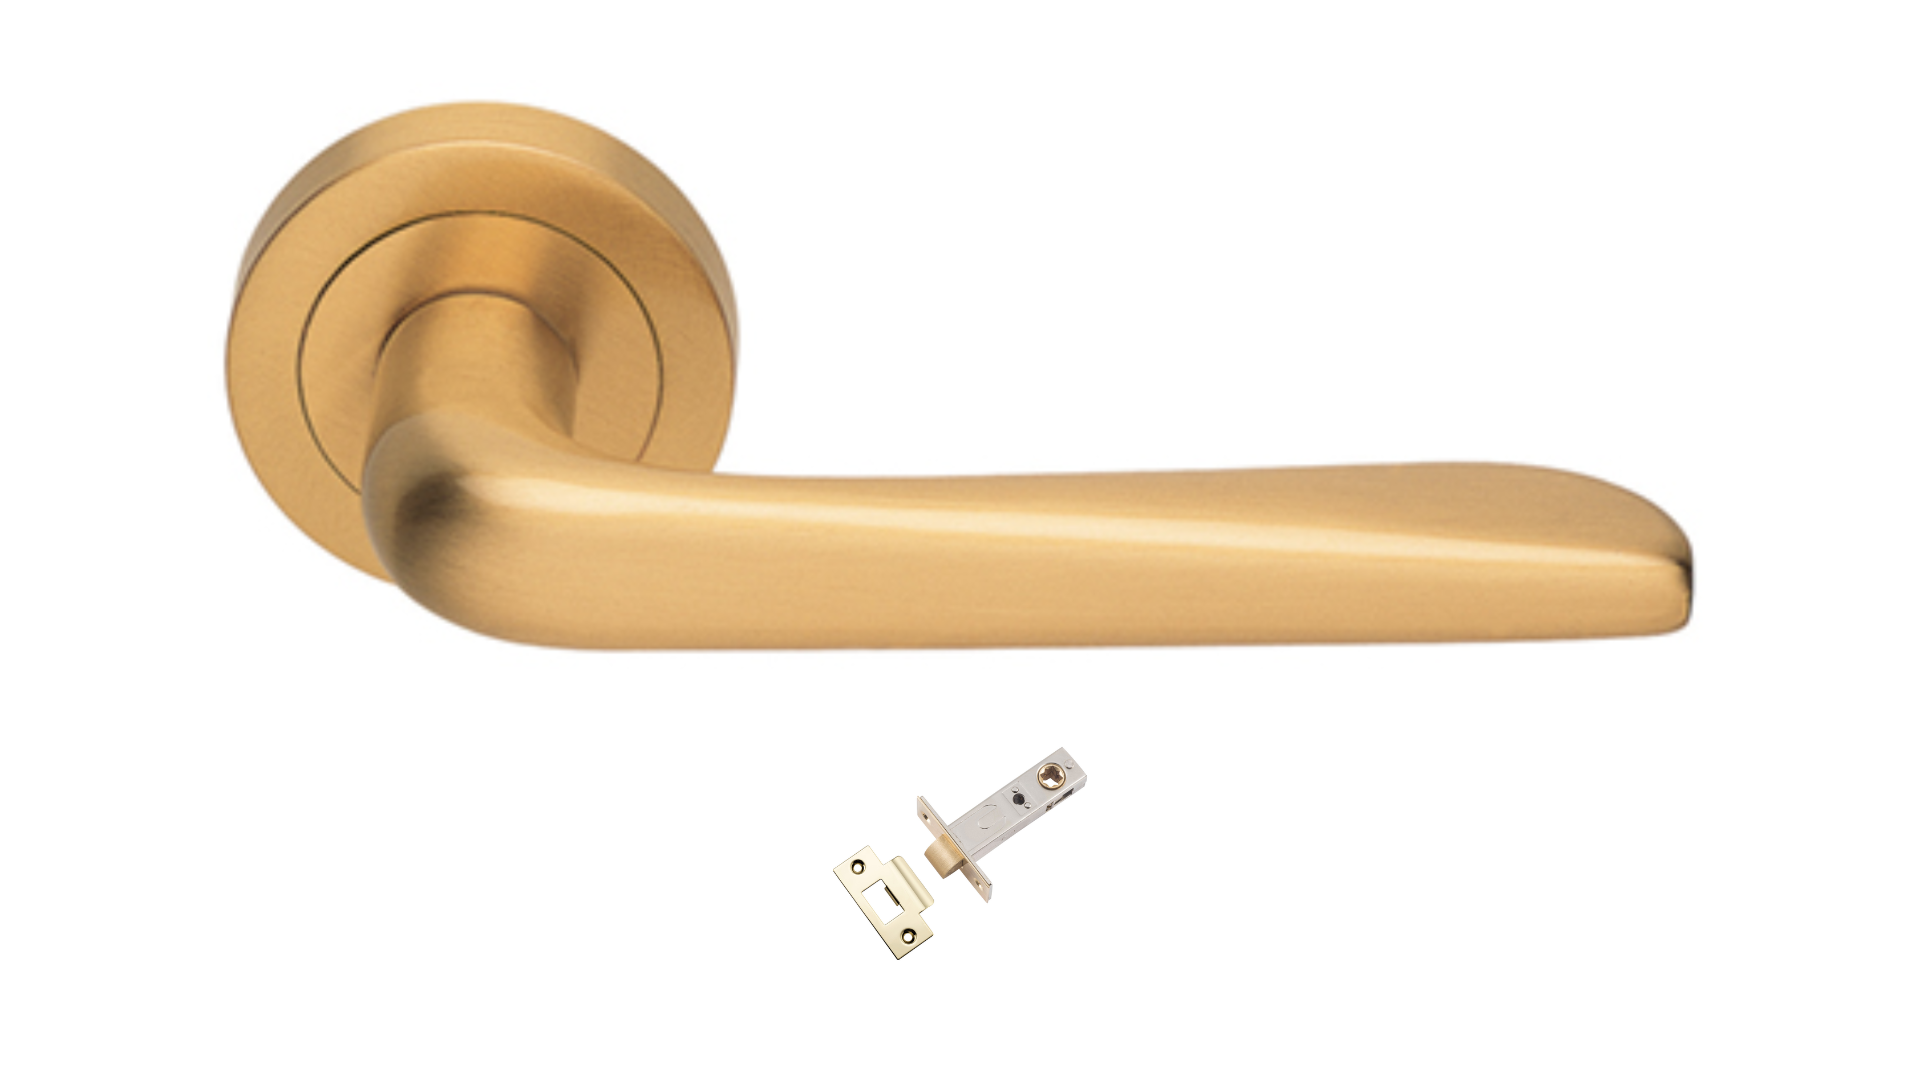 Product picture of the Petra Polished Brass Door Handle with separate tubular latch on a white background.